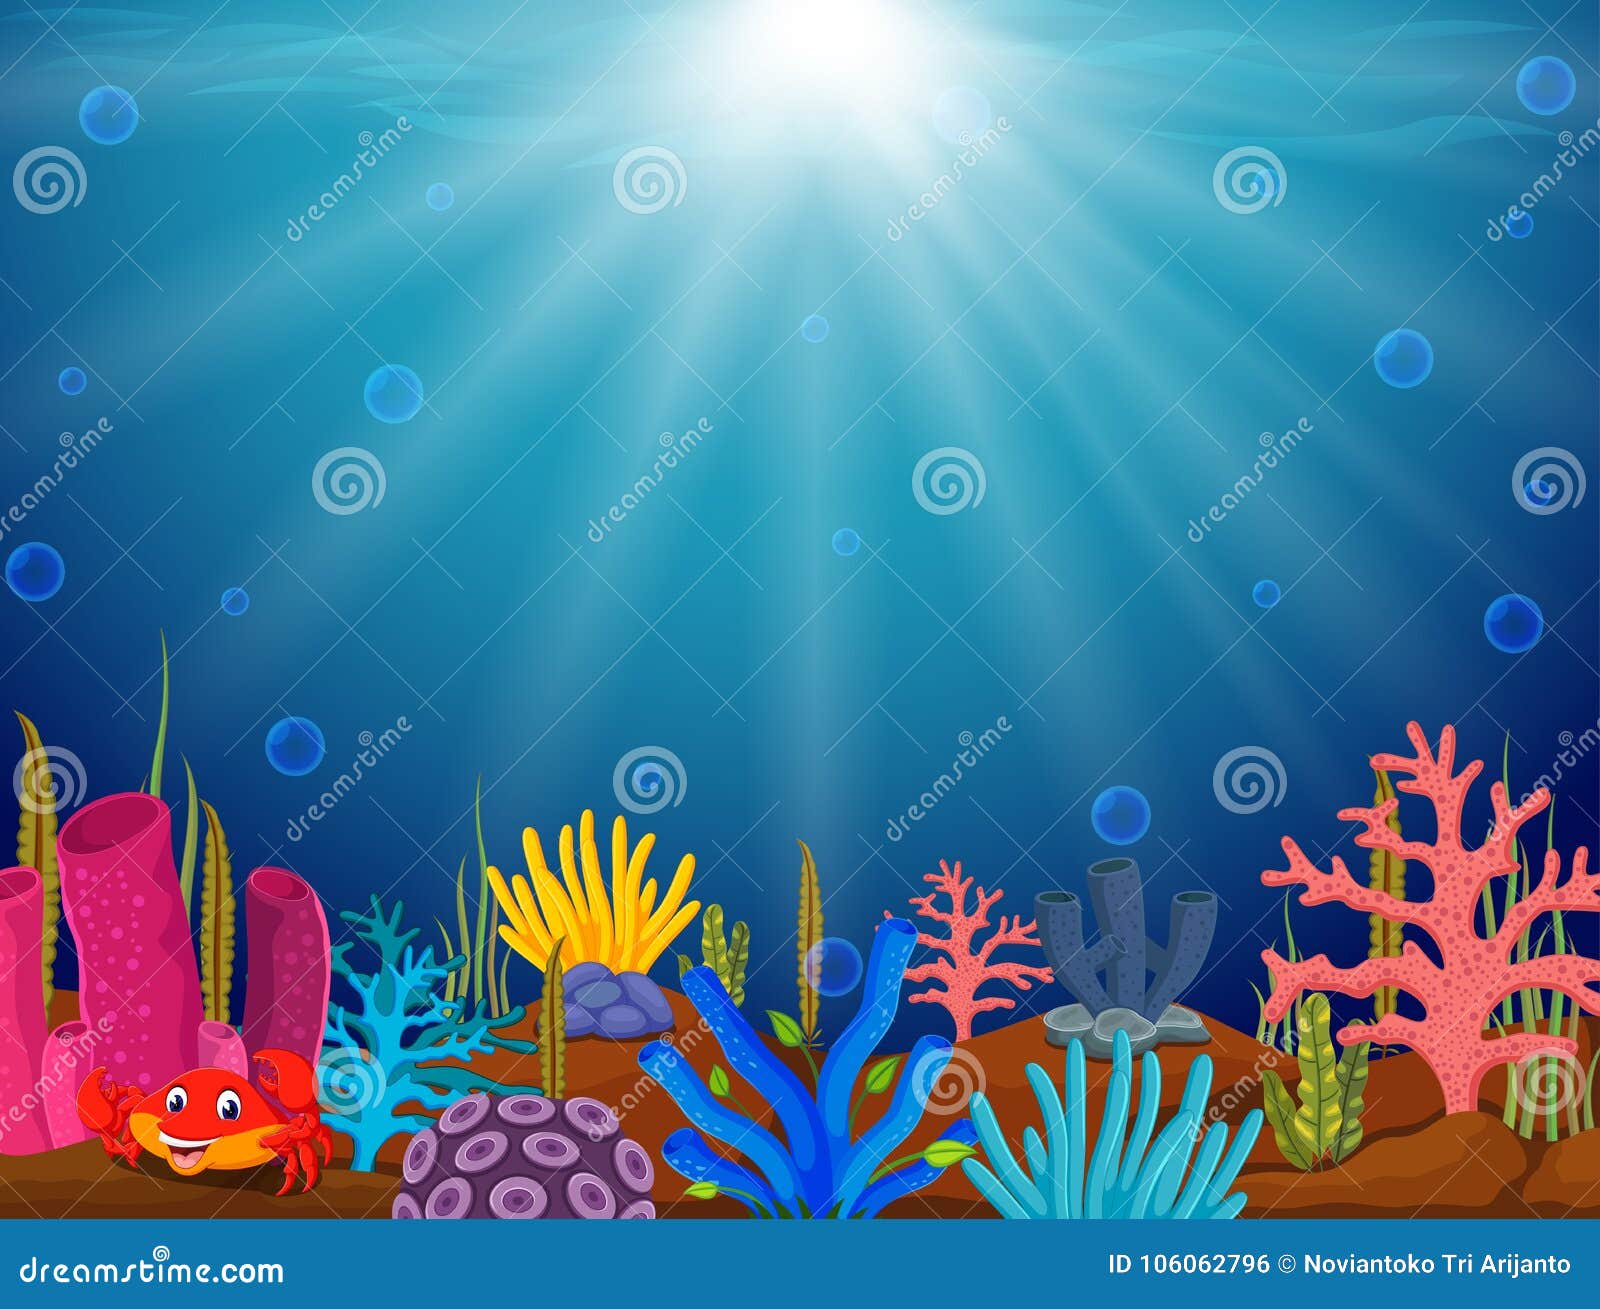 underwater scene with tropical coral reef